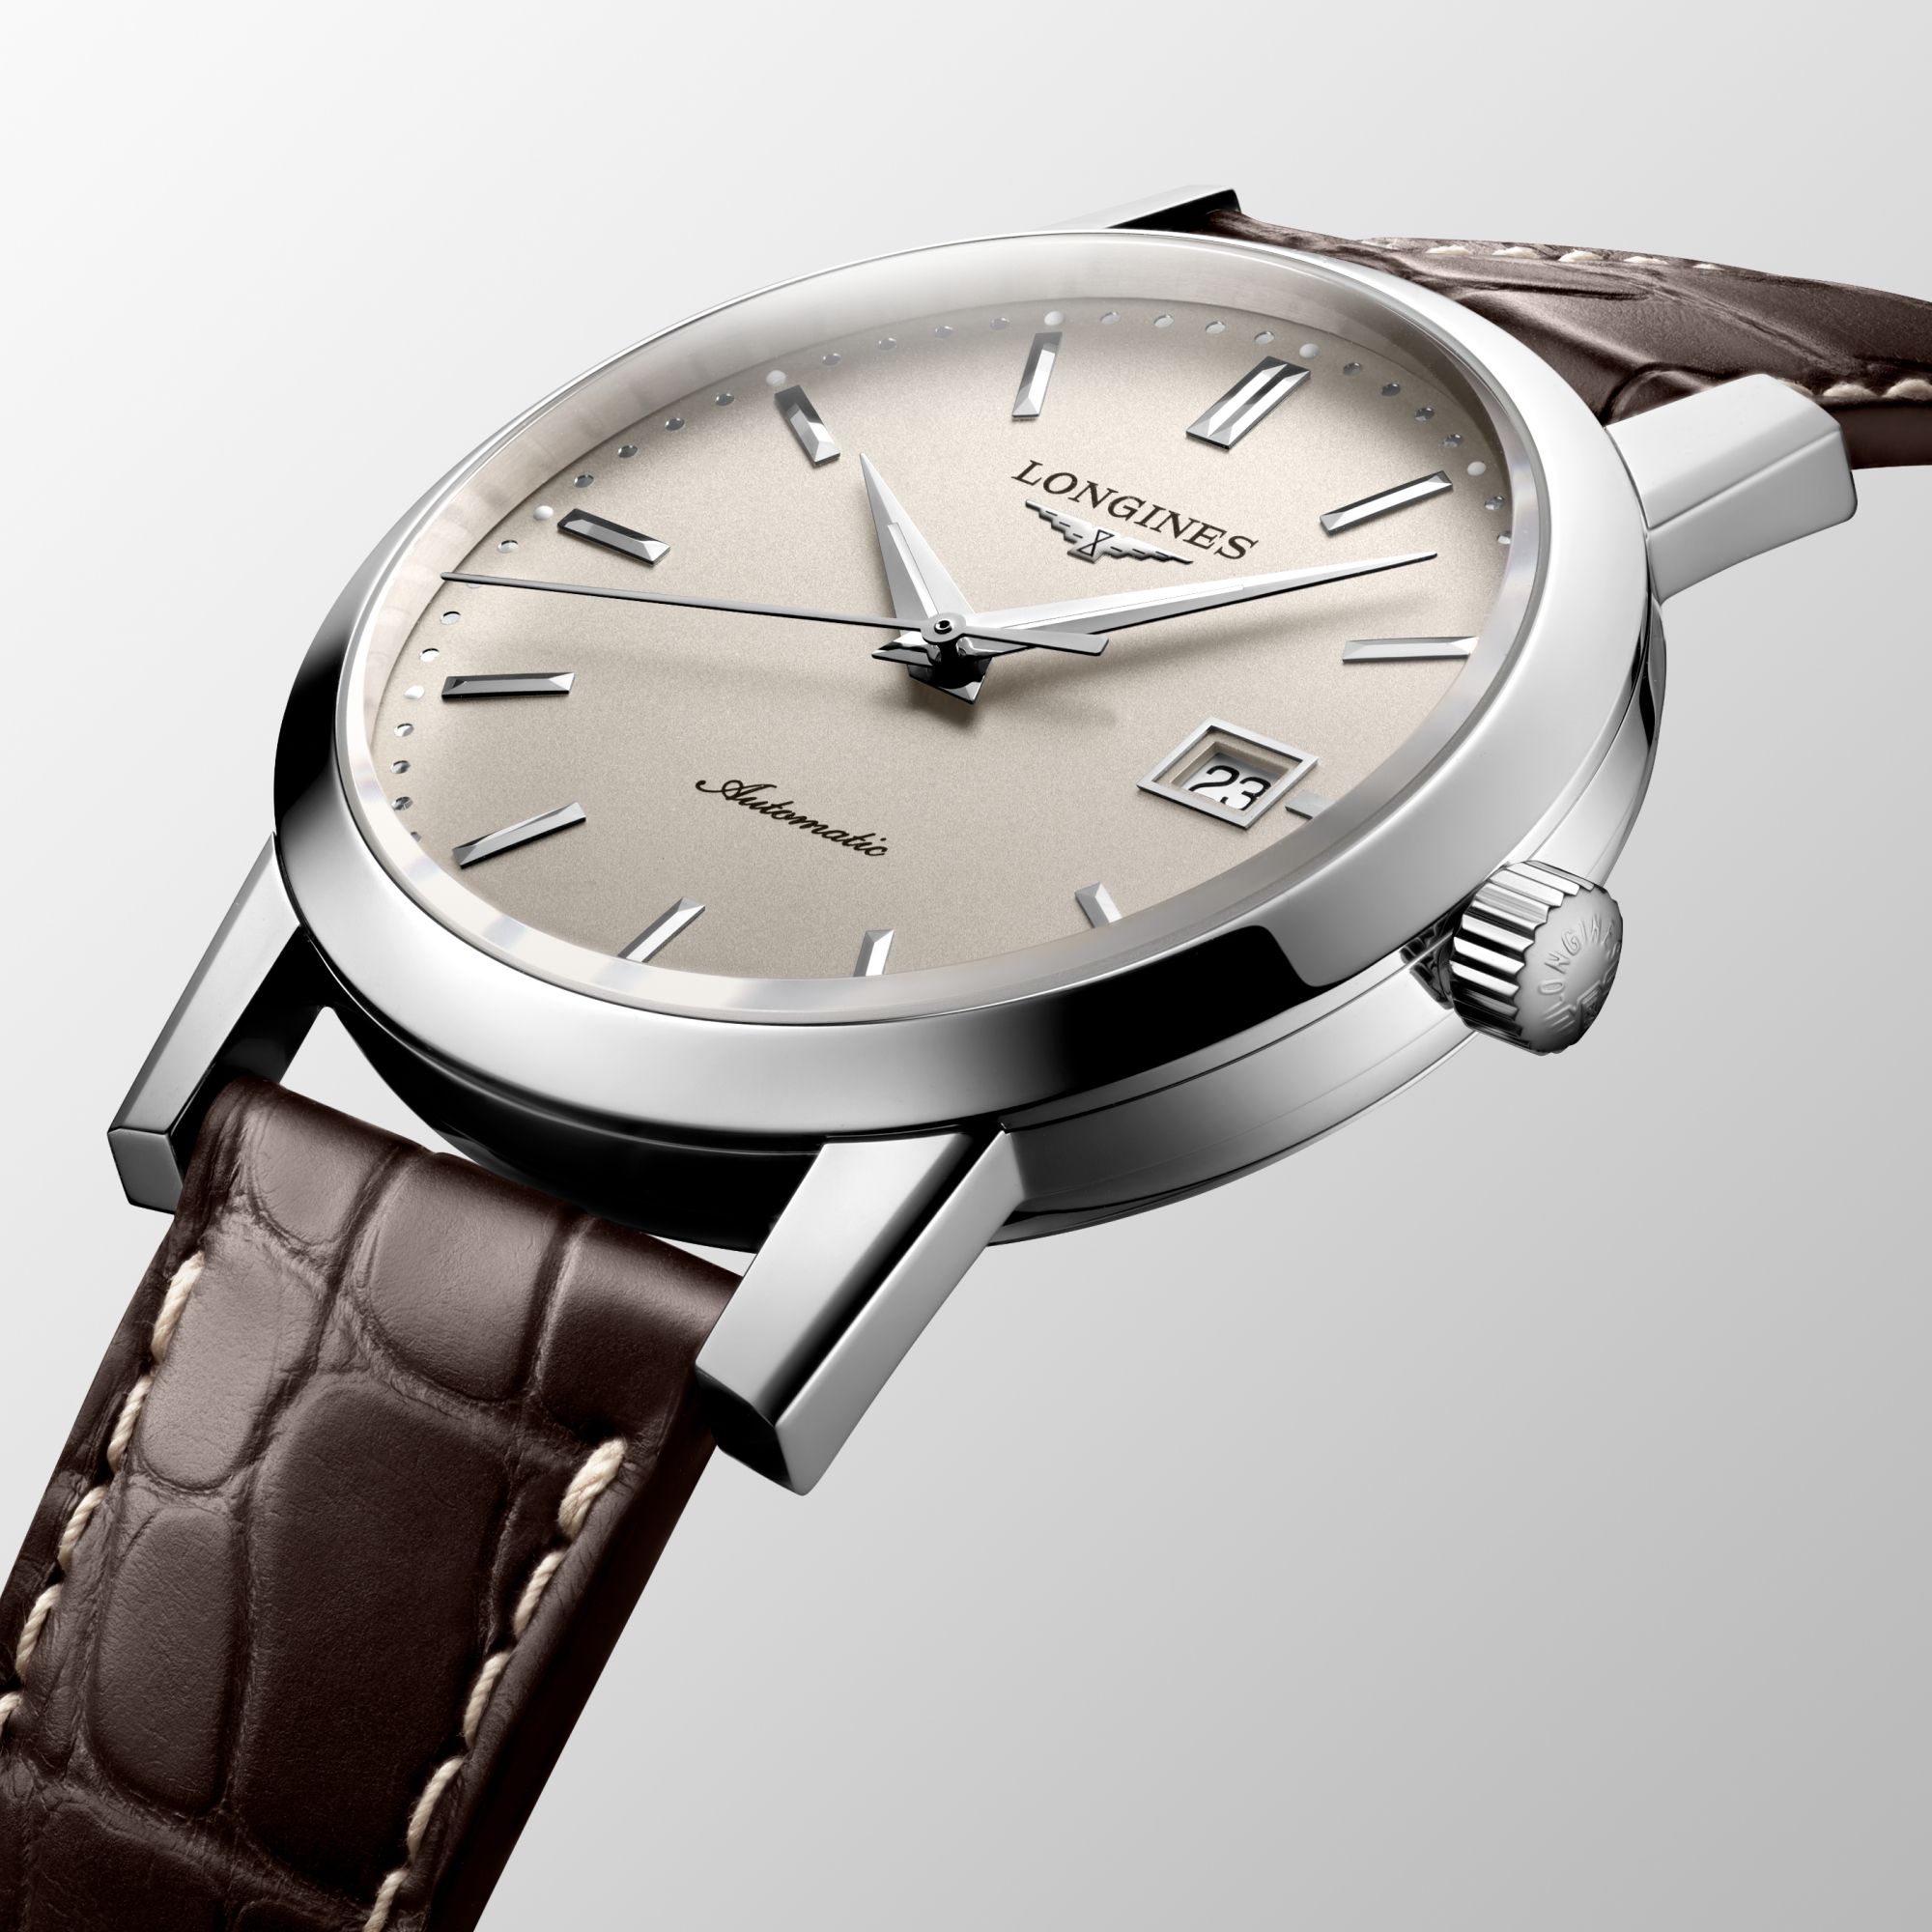 The Longines 1832 Watchmaking Tradition Référence :  L4.825.4.92.2 -2